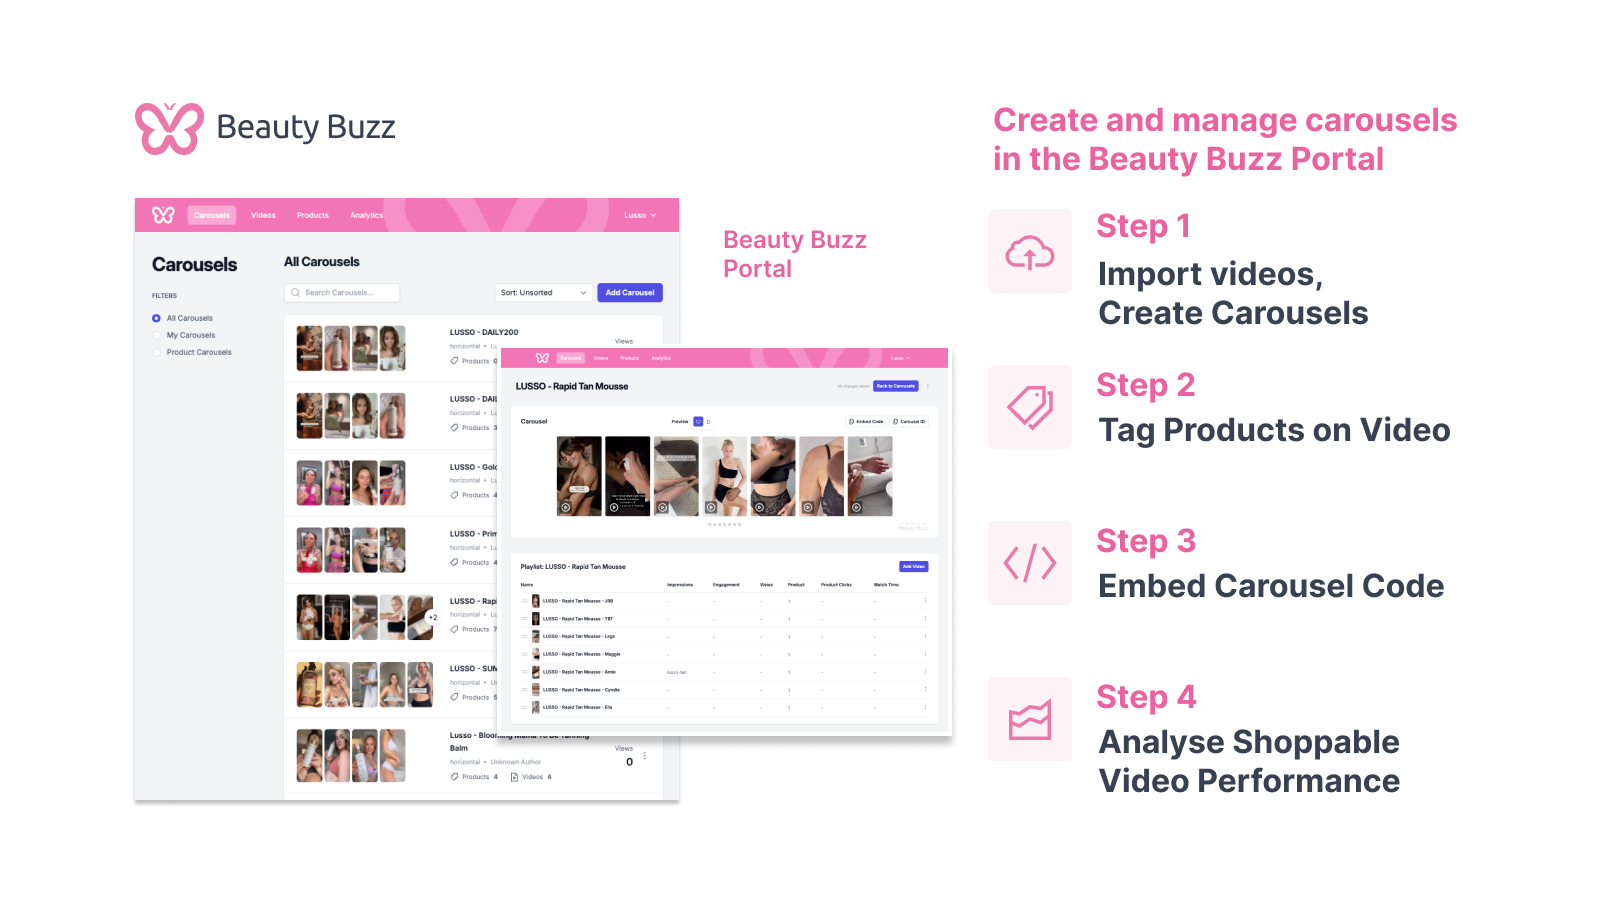 Create and manage carousels in the Beauty Buzz Portal